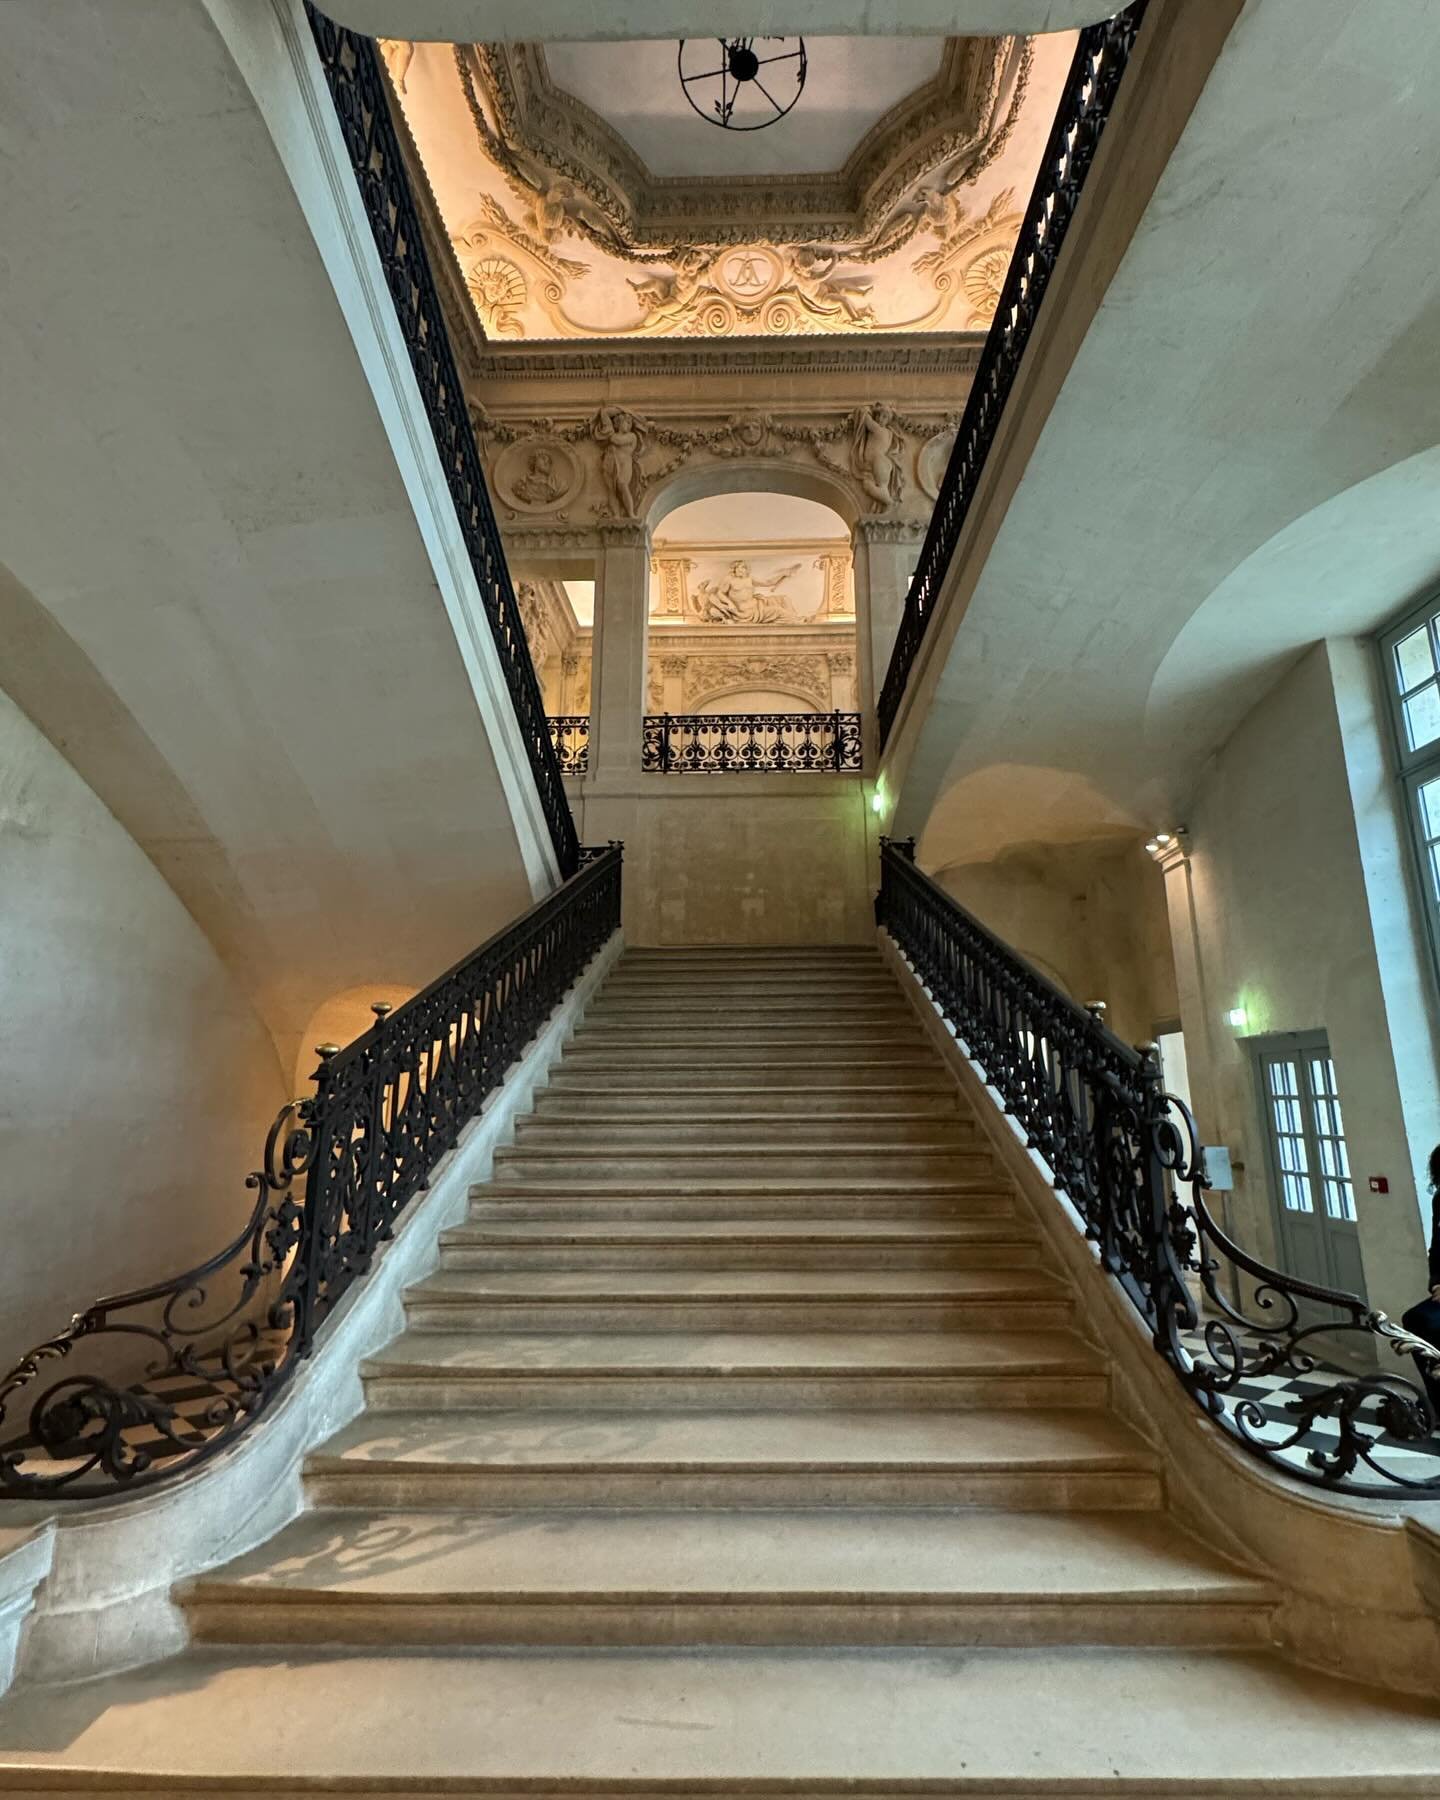 Today I went over to the @museepicassoparis, and yes, the art, (obviously) but I&rsquo;m kind of obsessed with the incredible staircase of this building!

Known as the H&ocirc;tel Sal&eacute;, it&rsquo;s one of the most stunning mansions in Paris dat